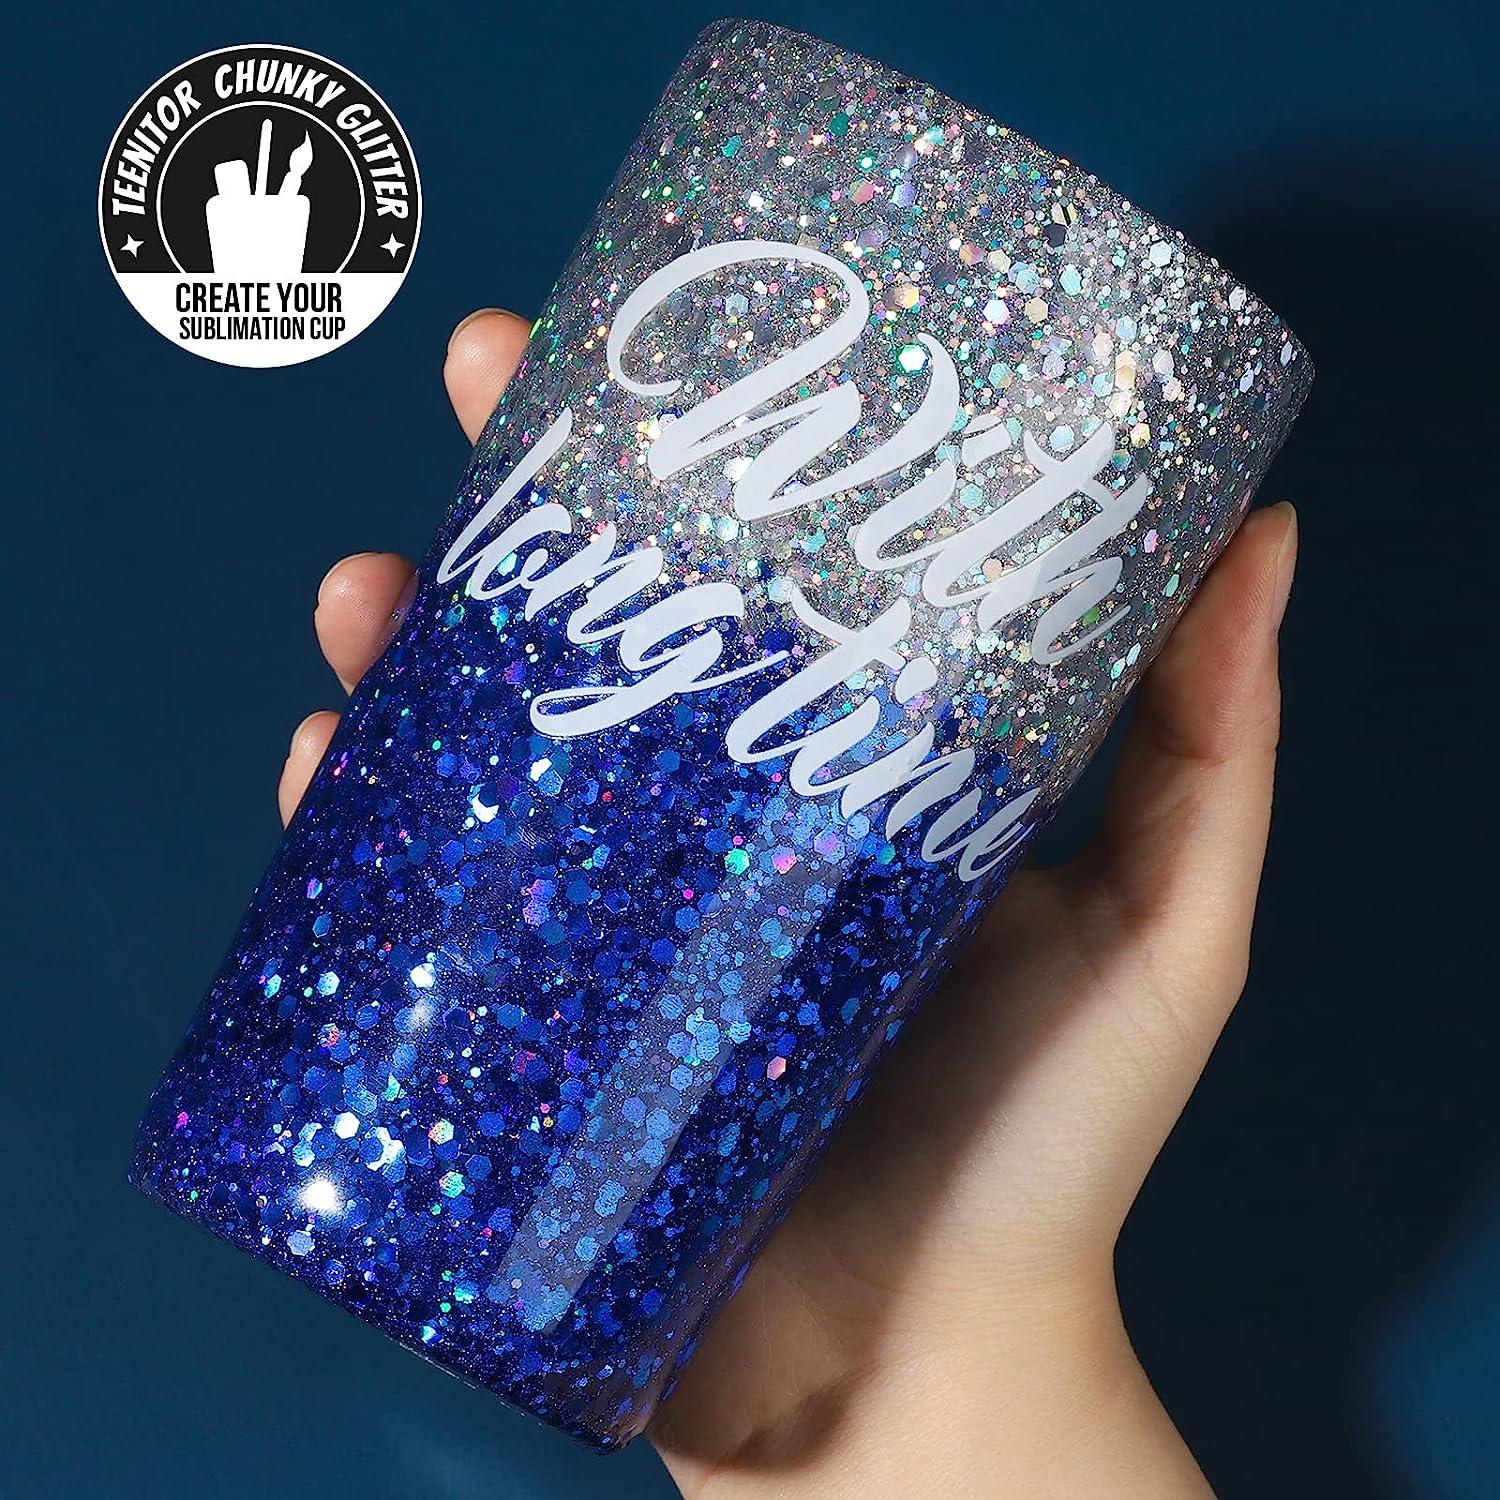 Teenitor Holographic Ultra Fine Glitter and Chunky Glitter,Craft Glitters  with 110g Resin Glitter Powder Sequins and 100g Metallic Iridescent Chunky